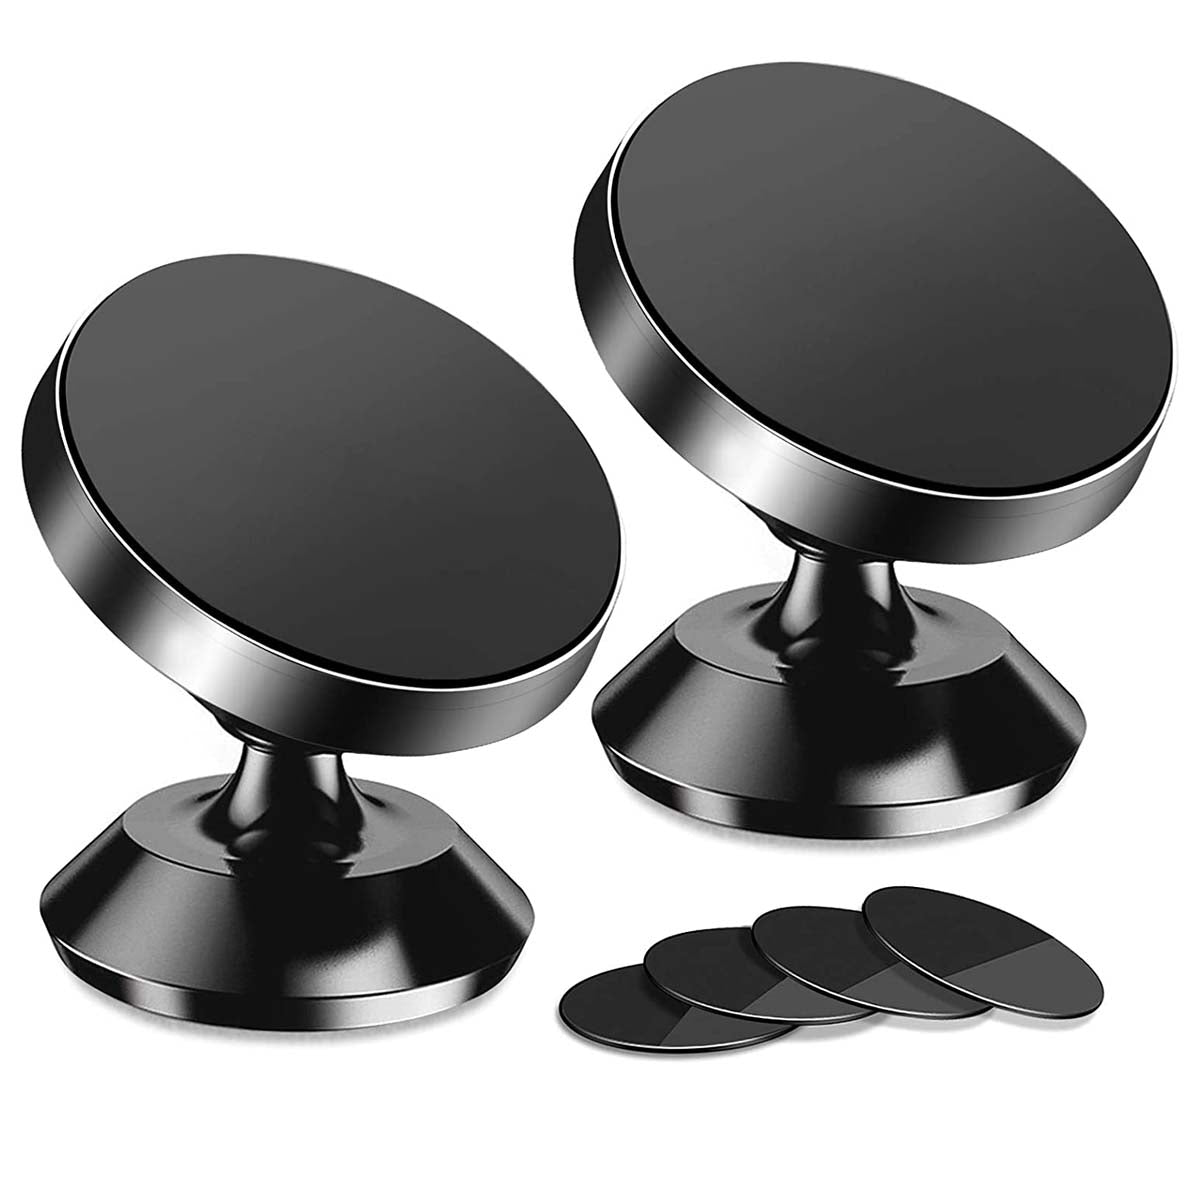 [2 Pack ] Magnetic Phone Mount, Custom For Cars, [ Super Strong Magnet ] [ with 4 Metal Plate ] car Magnetic Phone Holder, [ 360° Rotation ] Universal Dashboard car Mount Fits All Cell Phones, Car Accessories AR13982